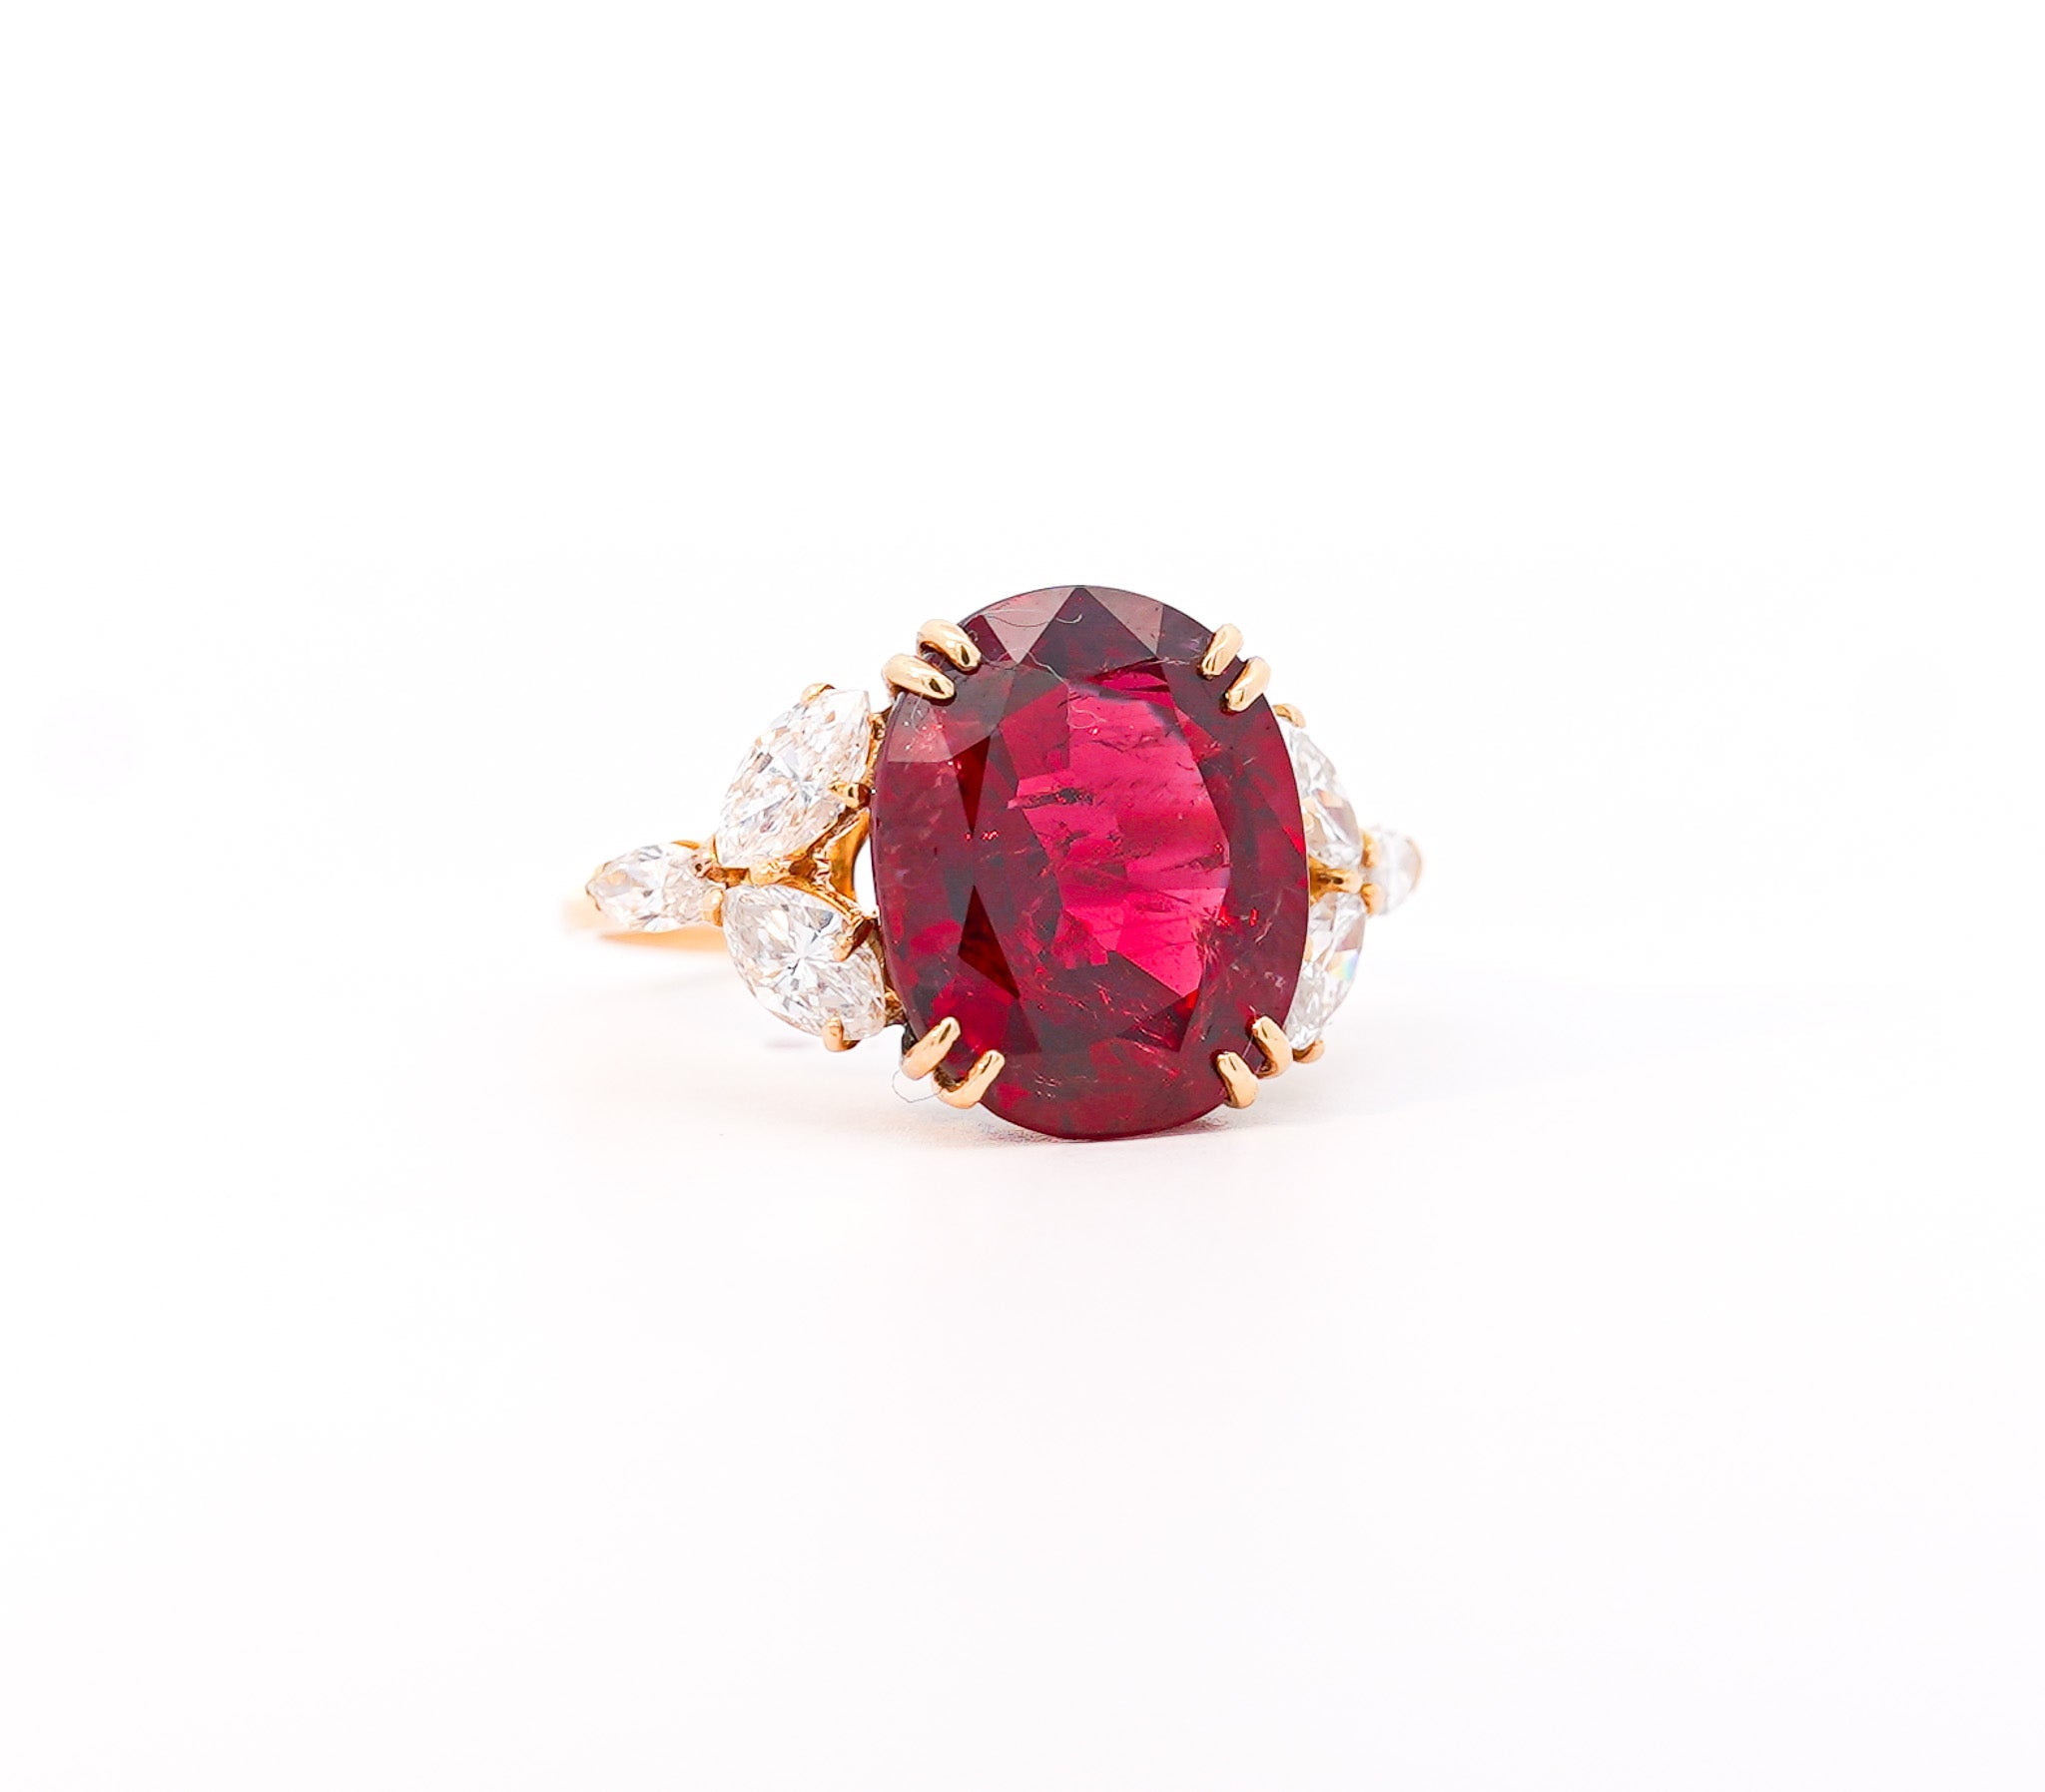 Van-Cleef-Arpels-8_85-Carat-No-Heat-Oval-Ruby-in-18k-Yellow-Gold-Ring-Rings-2_228aad83-7e64-4ab4-9bef-fb89bde66e5a.jpg